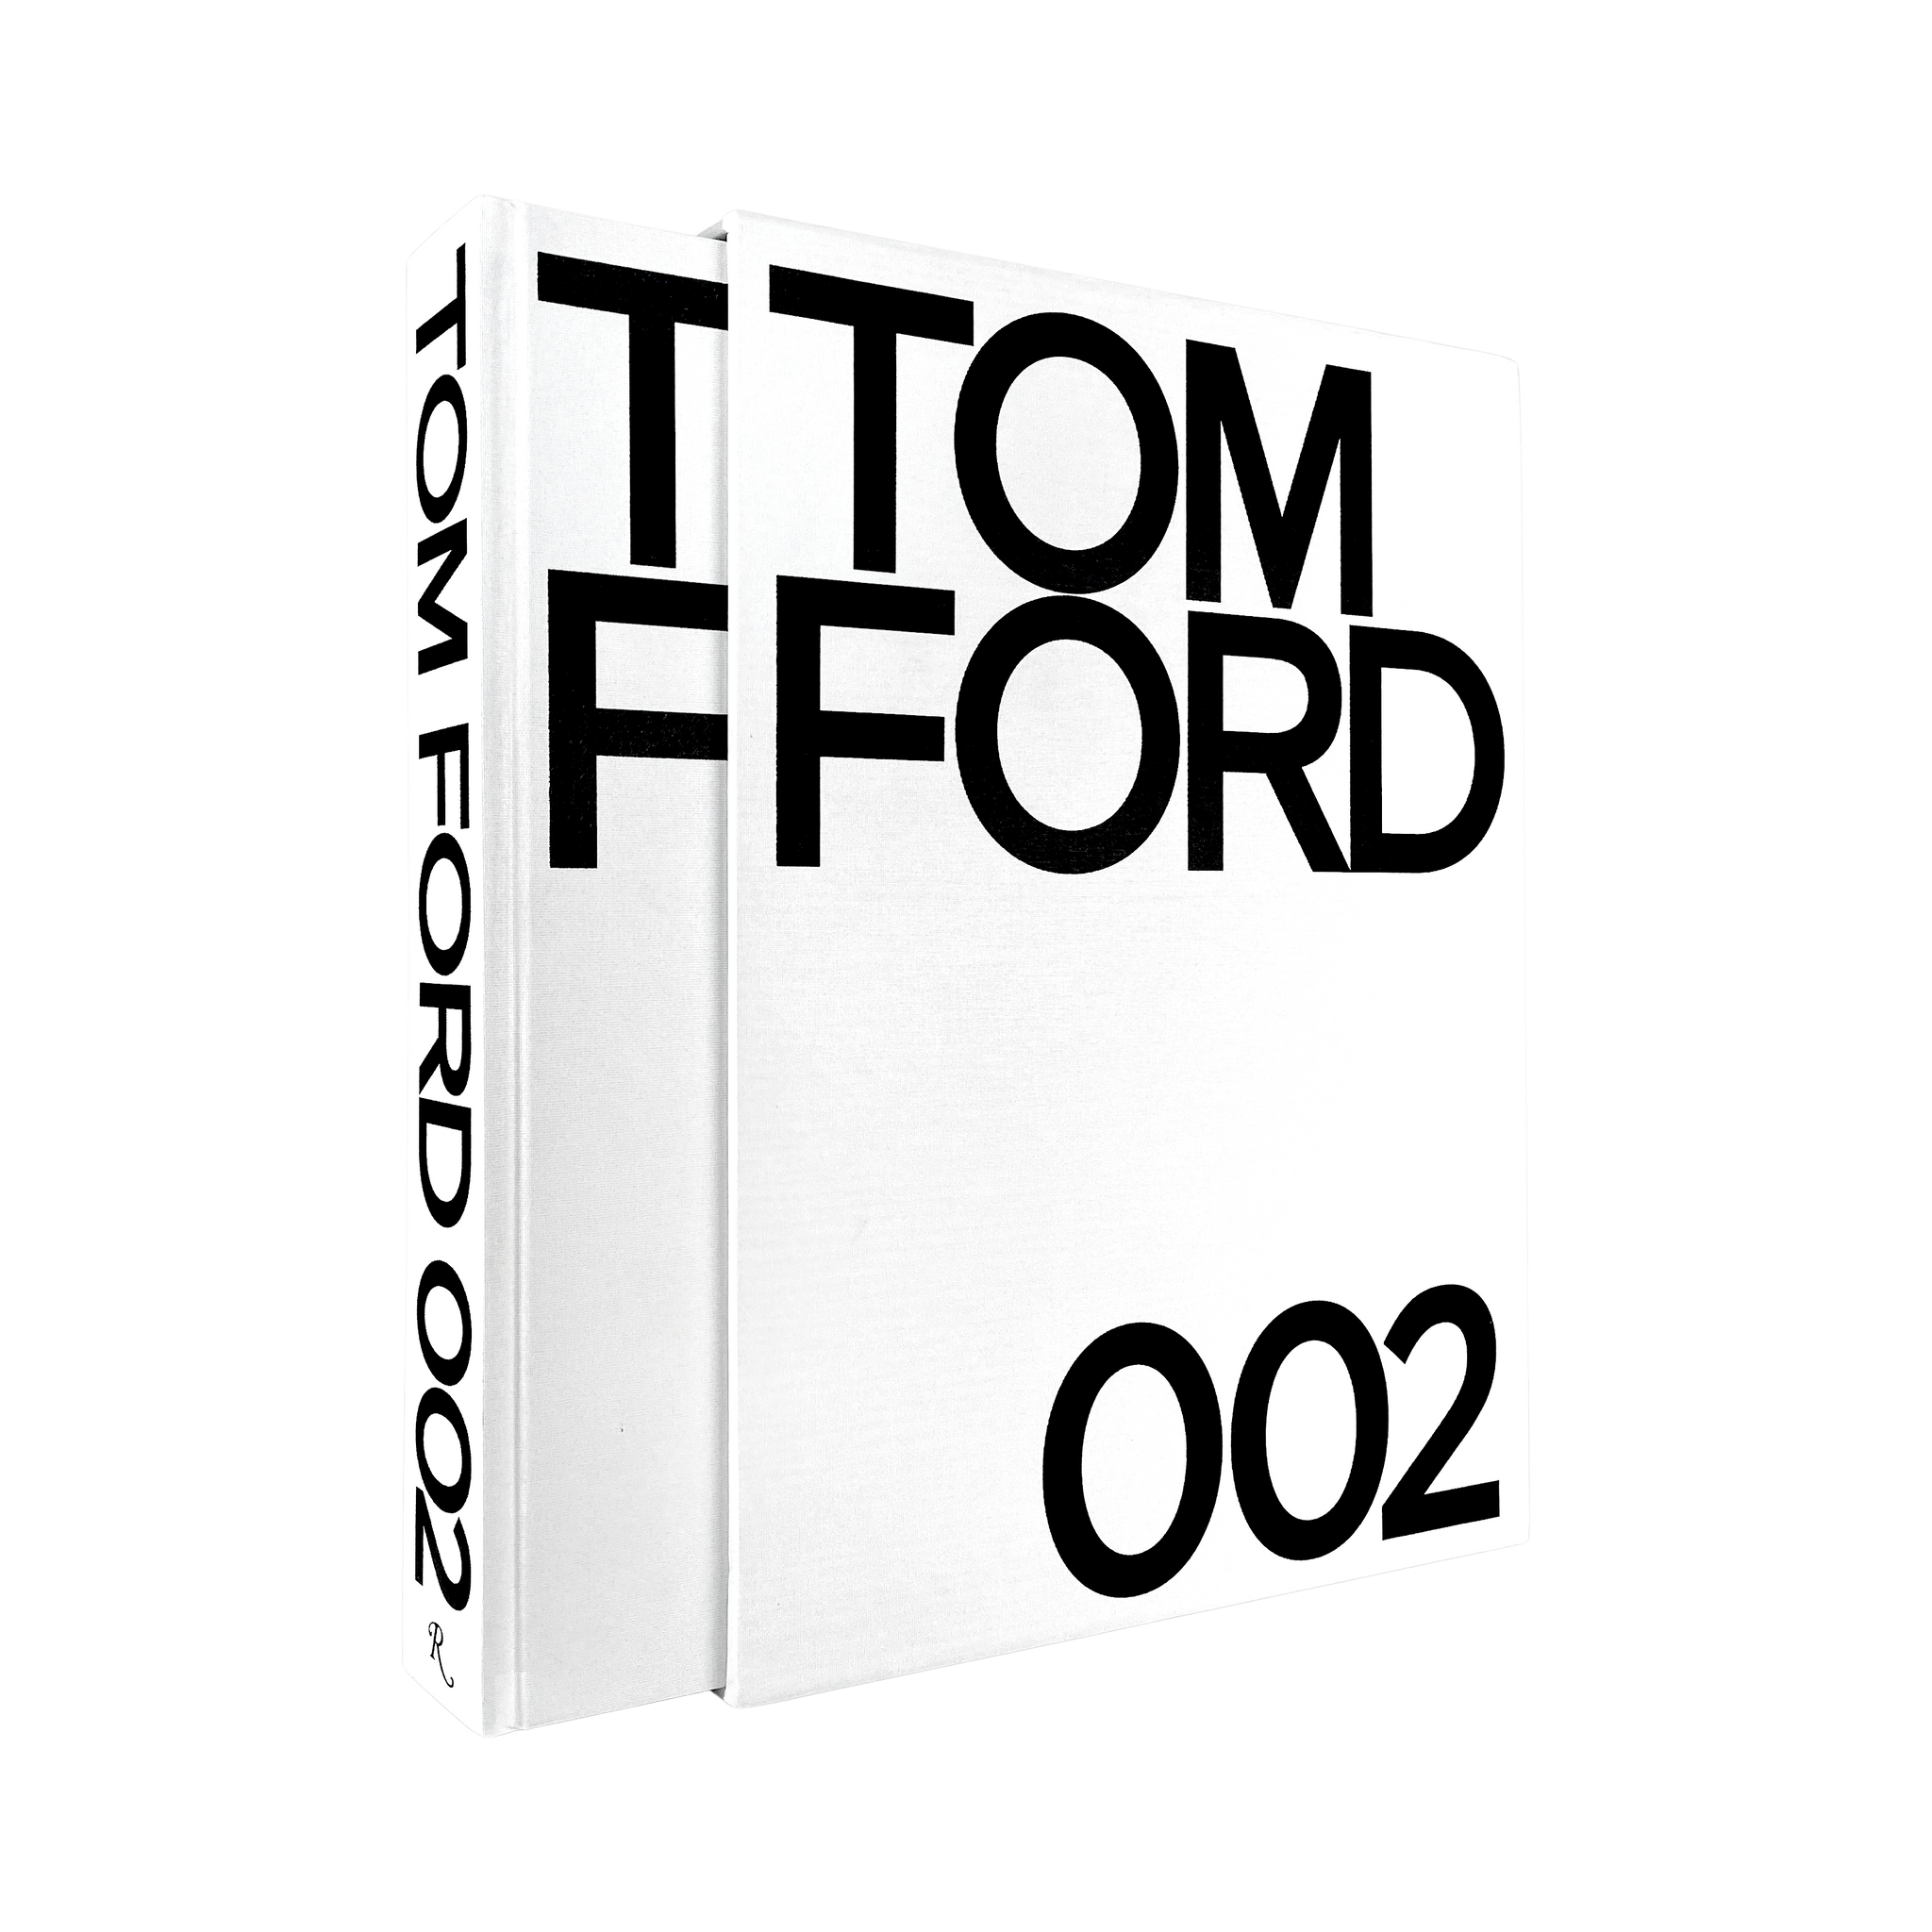 86405 Rizzoli Tom Ford 002 Coffee table book – 